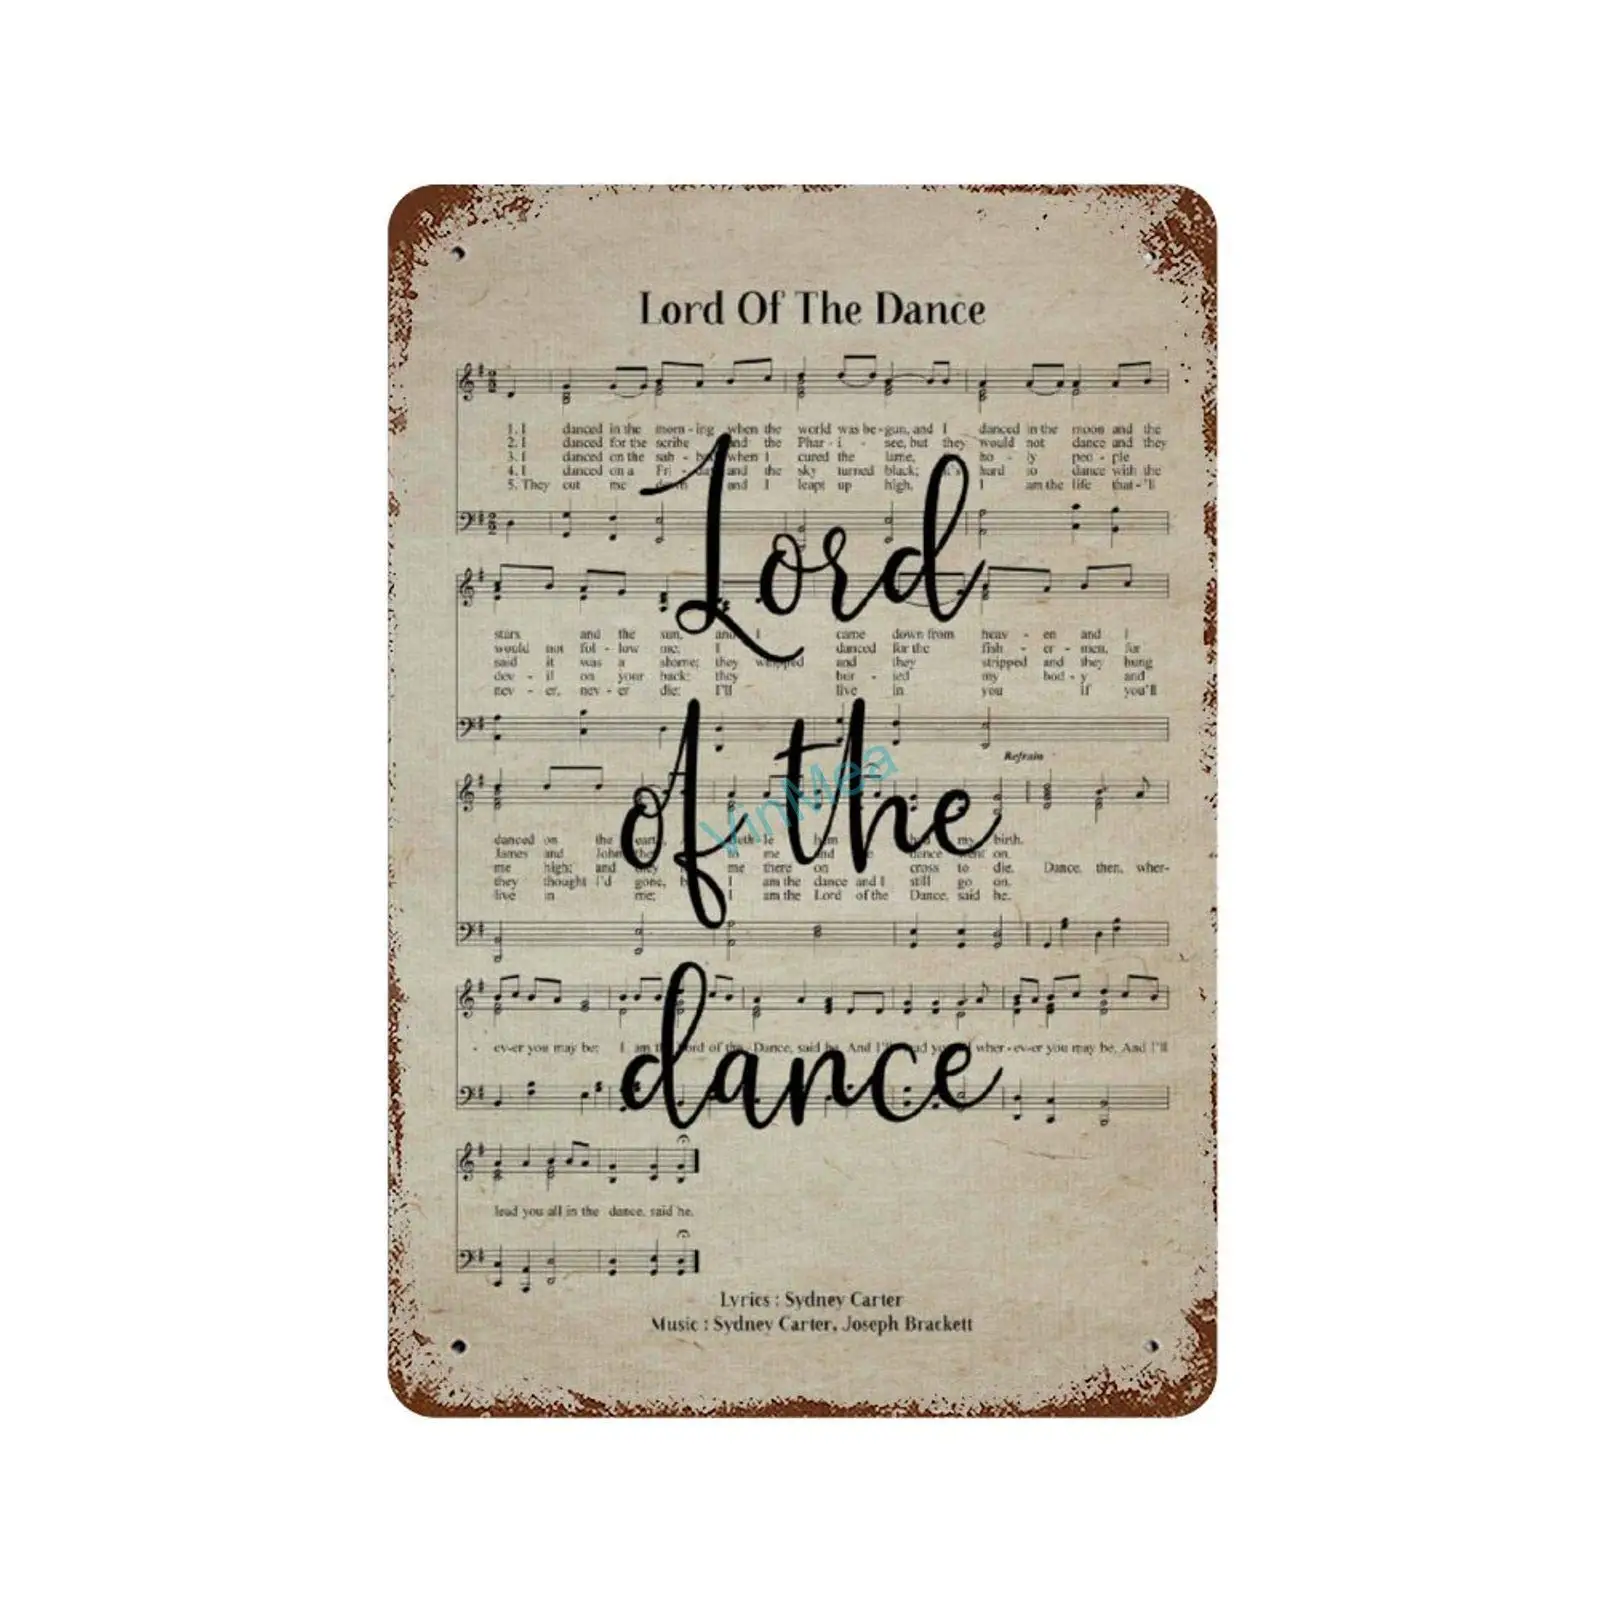 

Metal Sign Lord of The Dance Poster Reproduction Vintage Look Aluminum Plaque Wall Signs Decor, 8 x 12 Inches